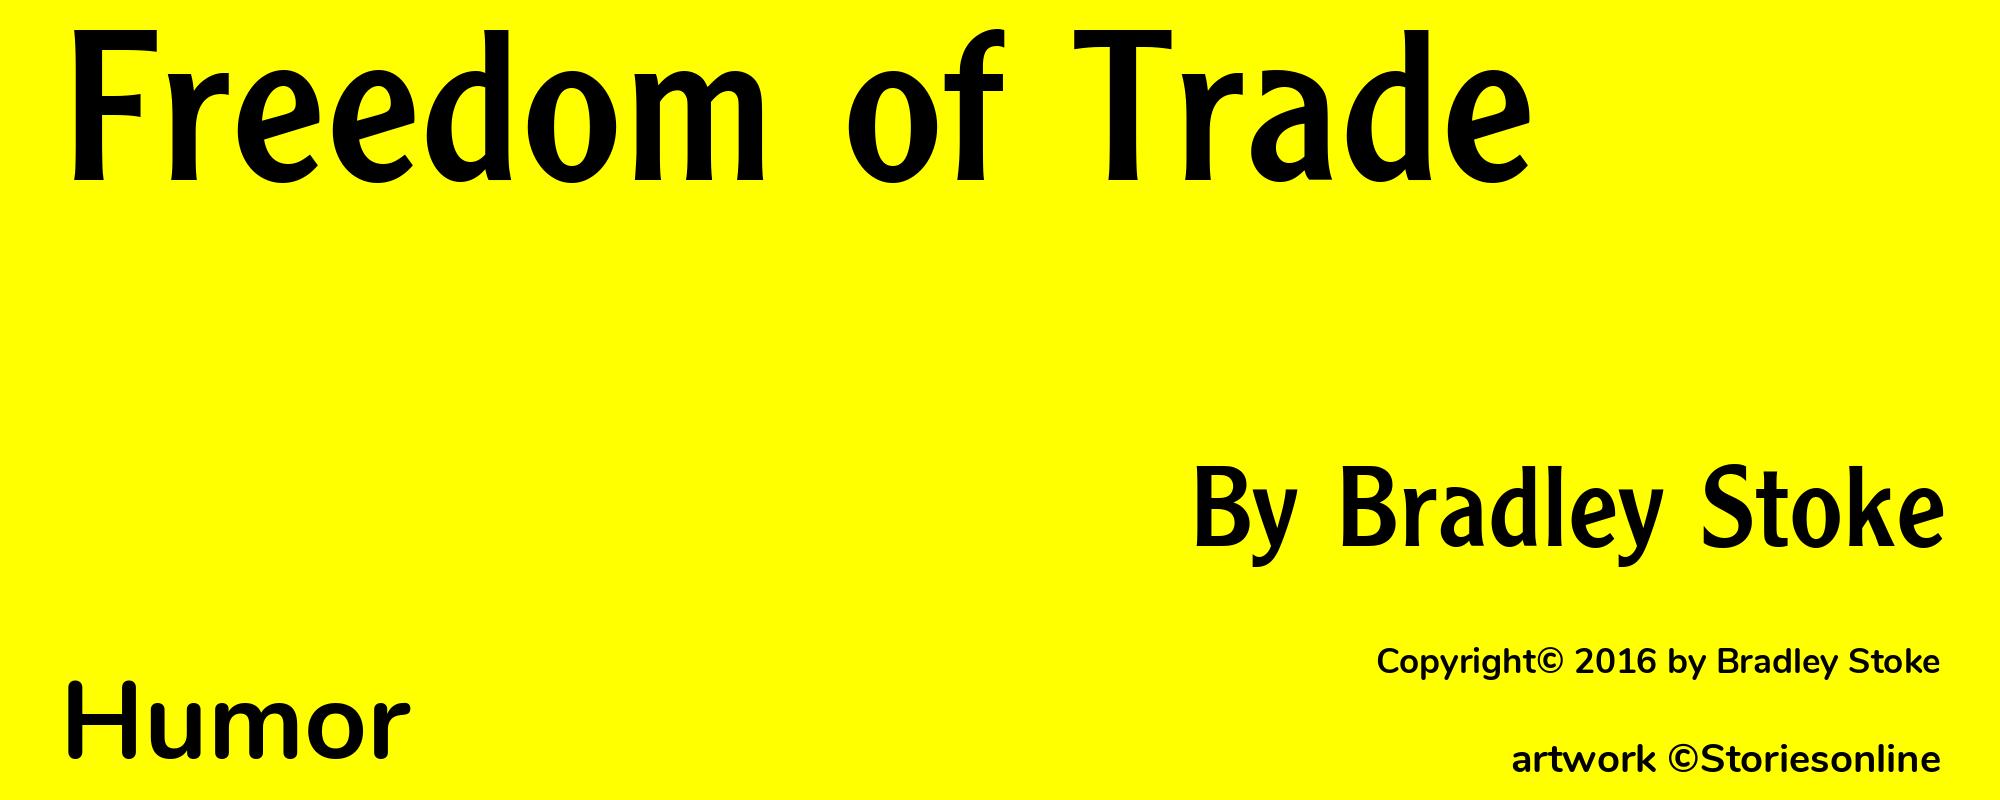 Freedom of Trade - Cover